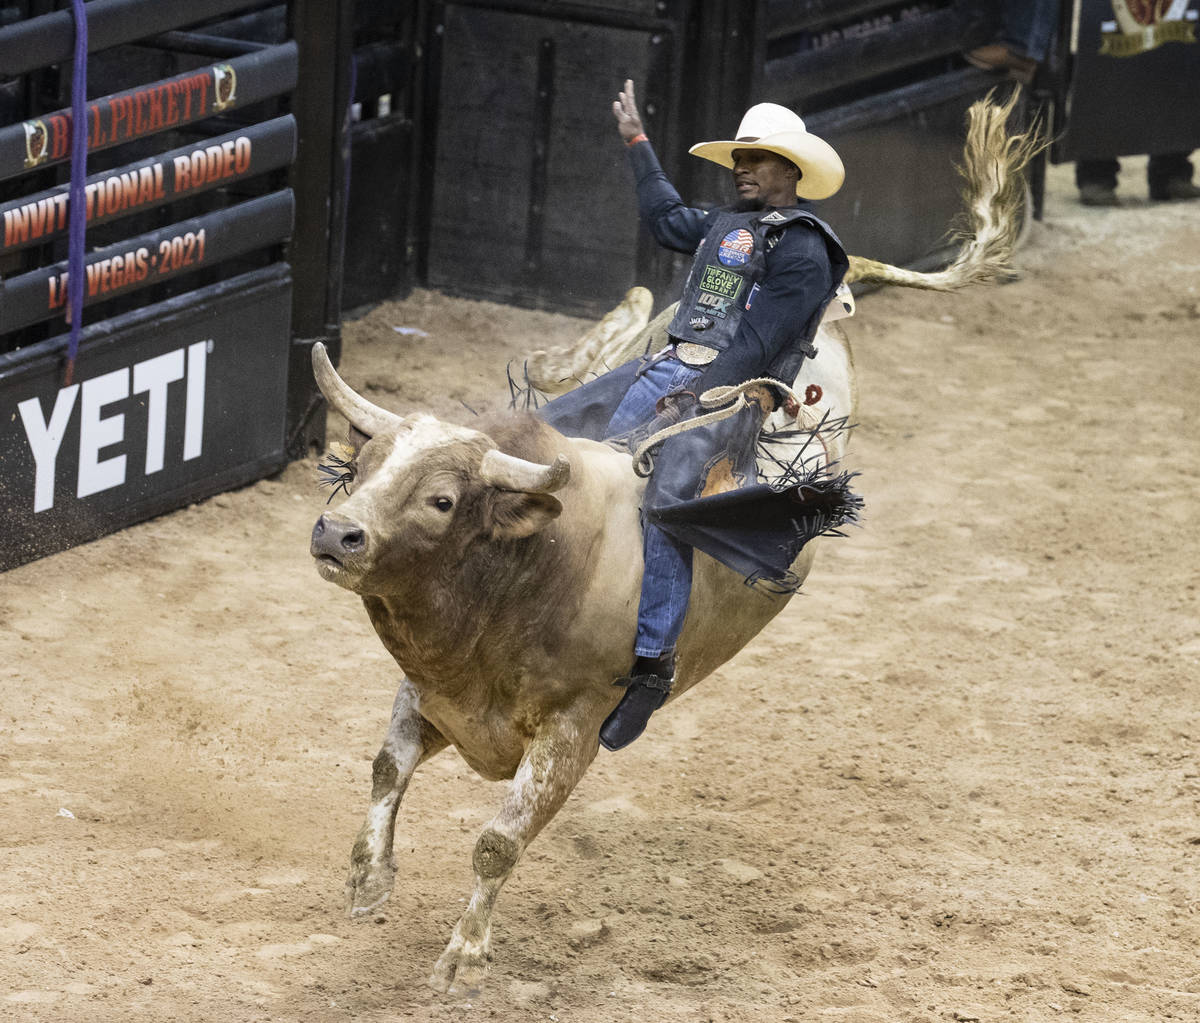 Bill Pickett rodeo gives Black cowboys league of their own Las Vegas